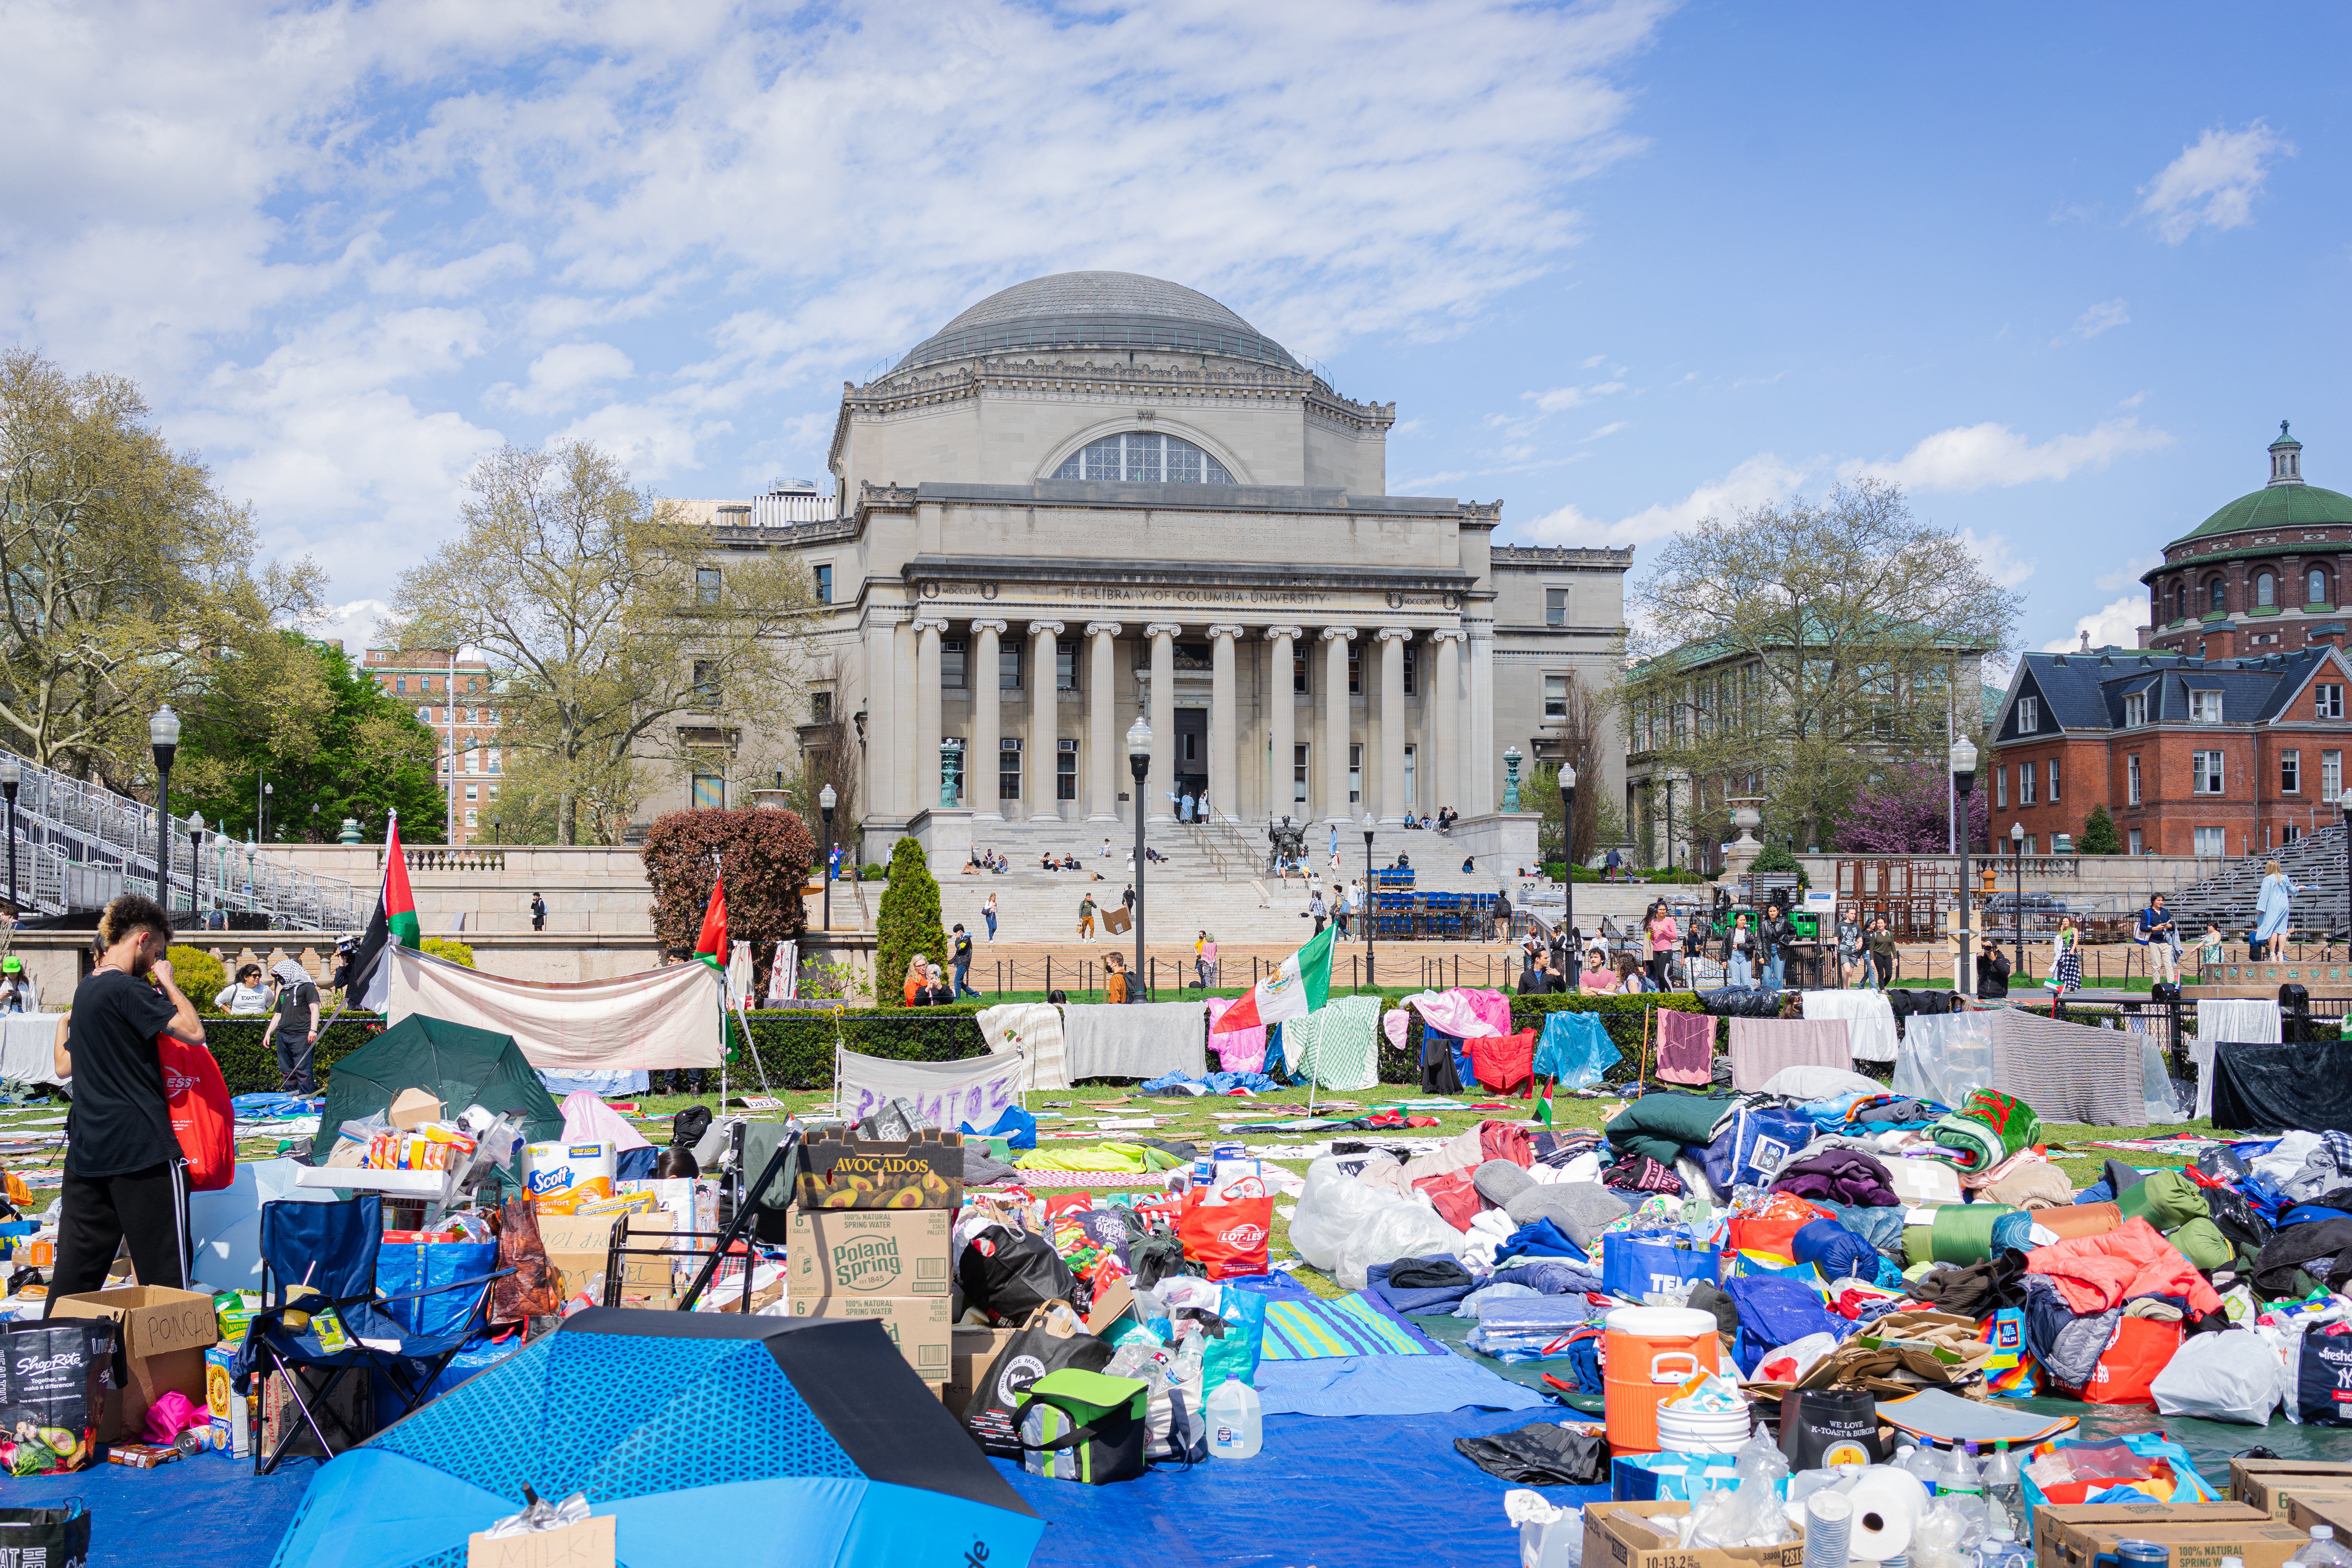 A lawn full of tarps and snacks and umbrellas, in front of a stately neoclassical building.